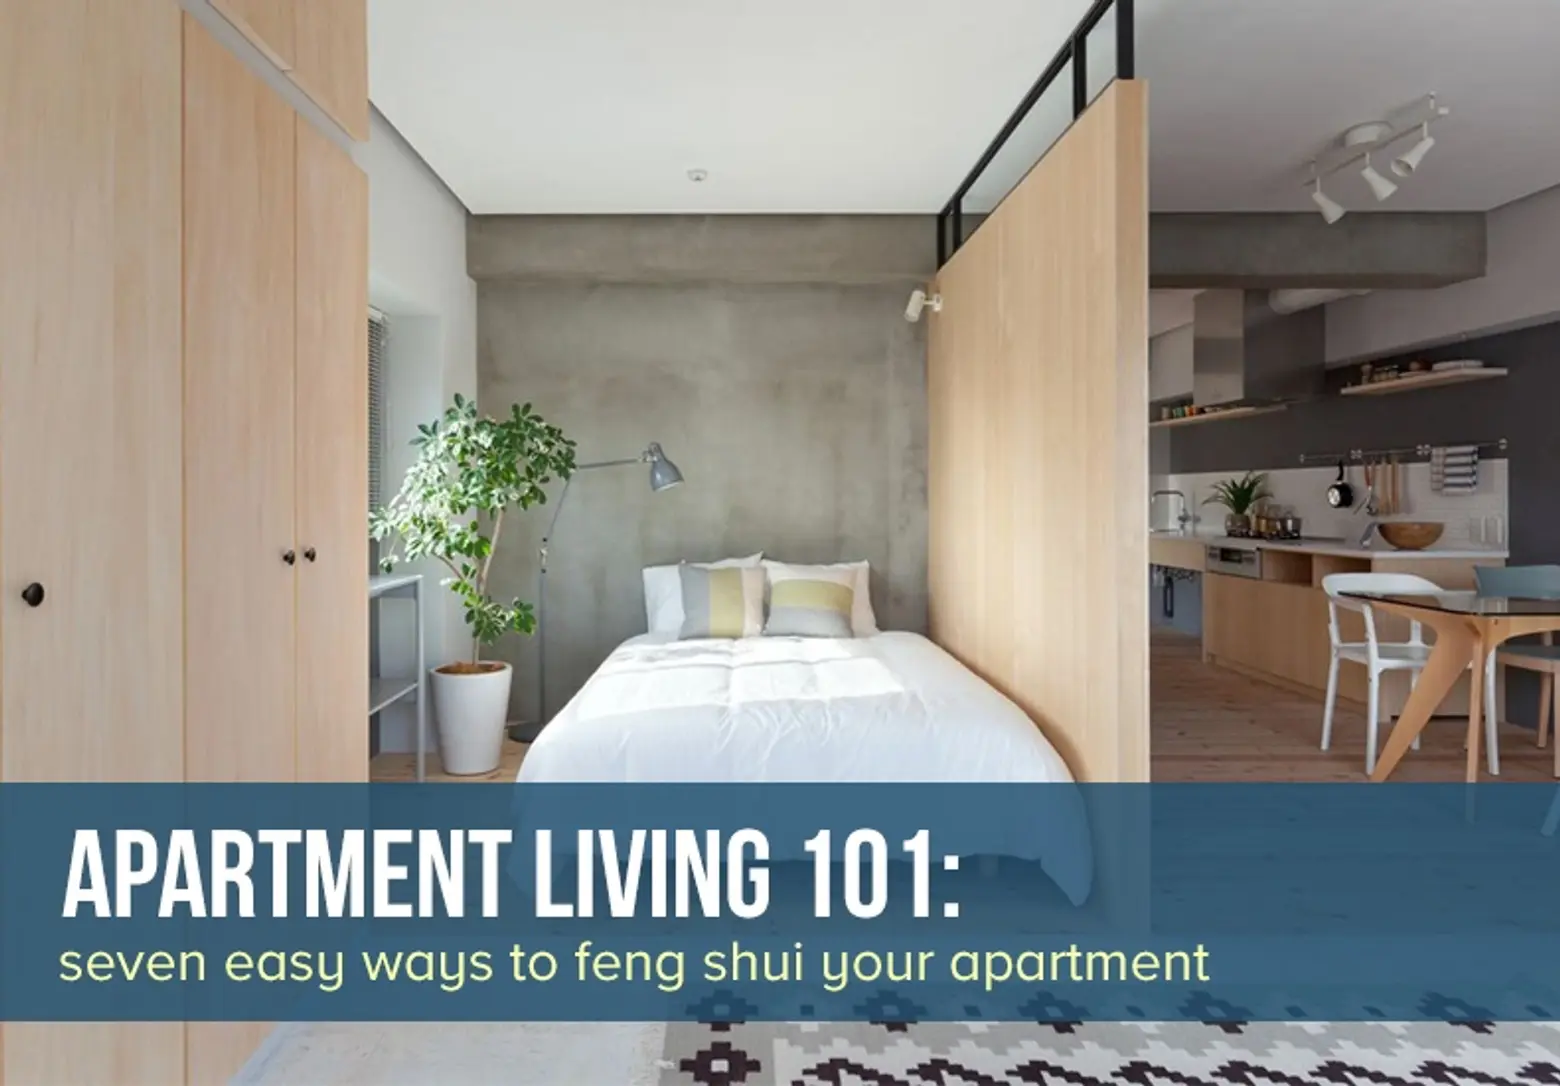 7 easy ways to feng shui your apartment